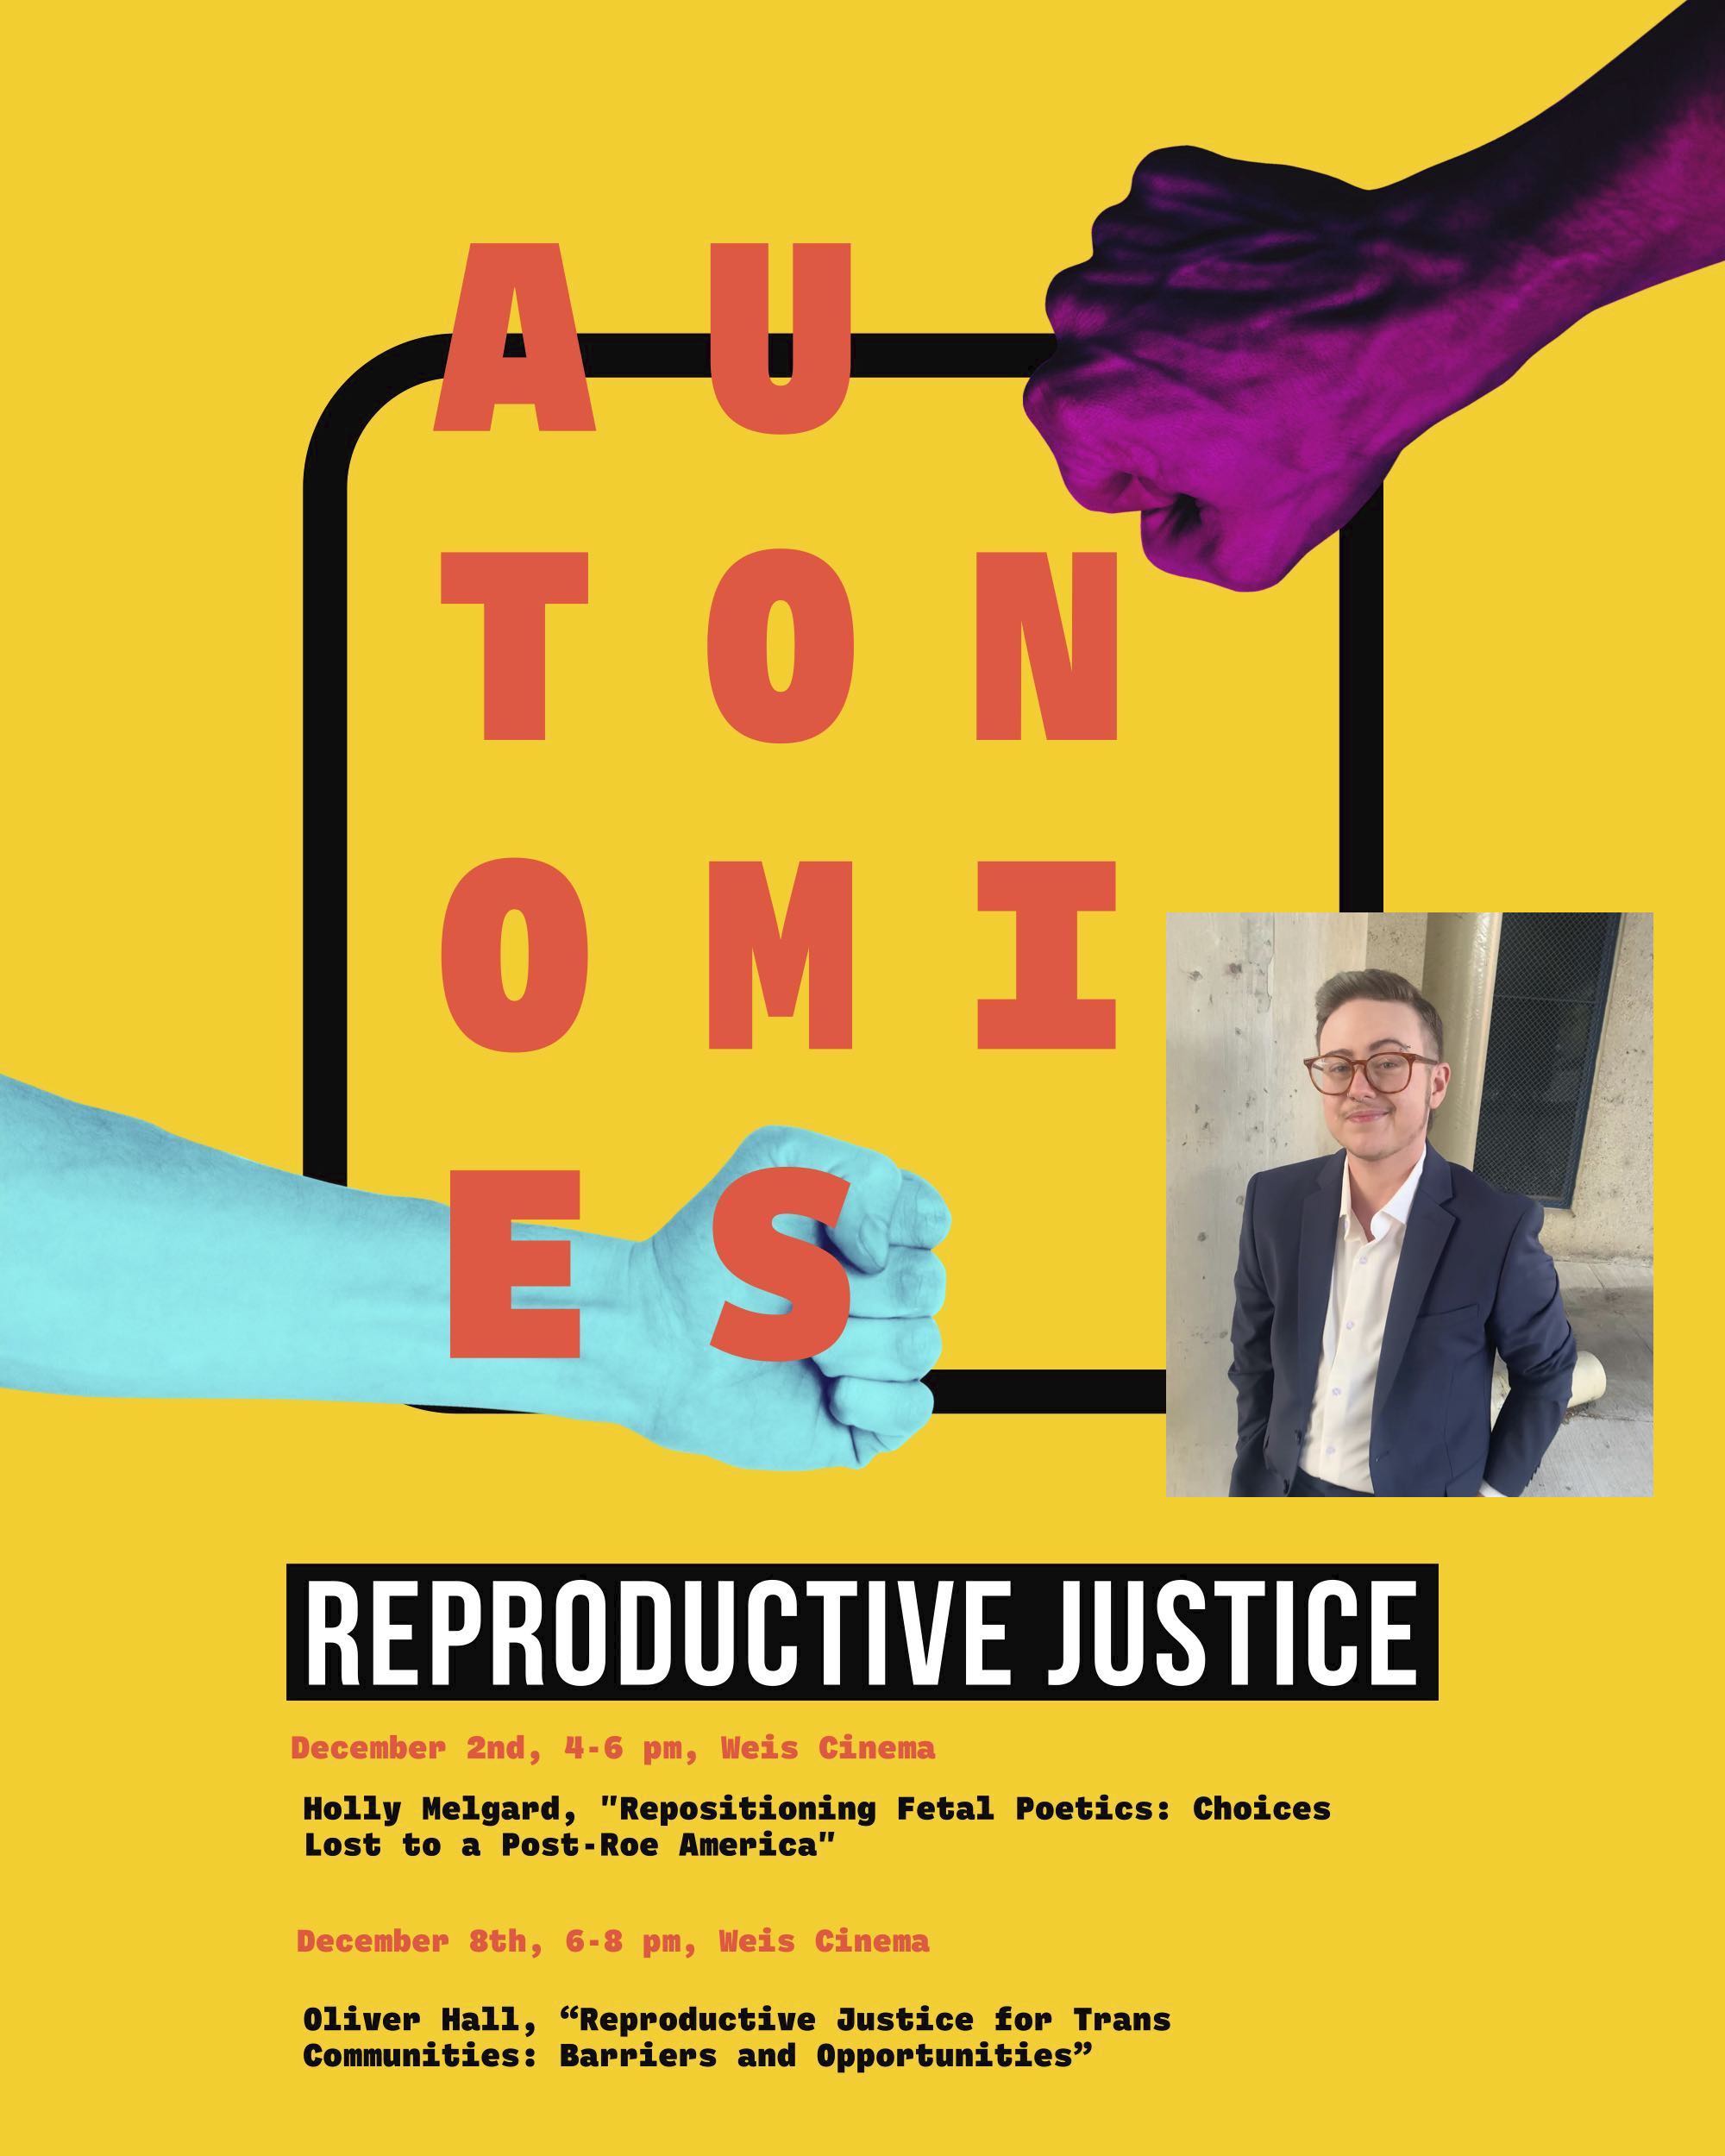 [Oliver Hall, &quot;Reproductive Justice for Trans Communities: Barriers and Opportunities&quot;] 